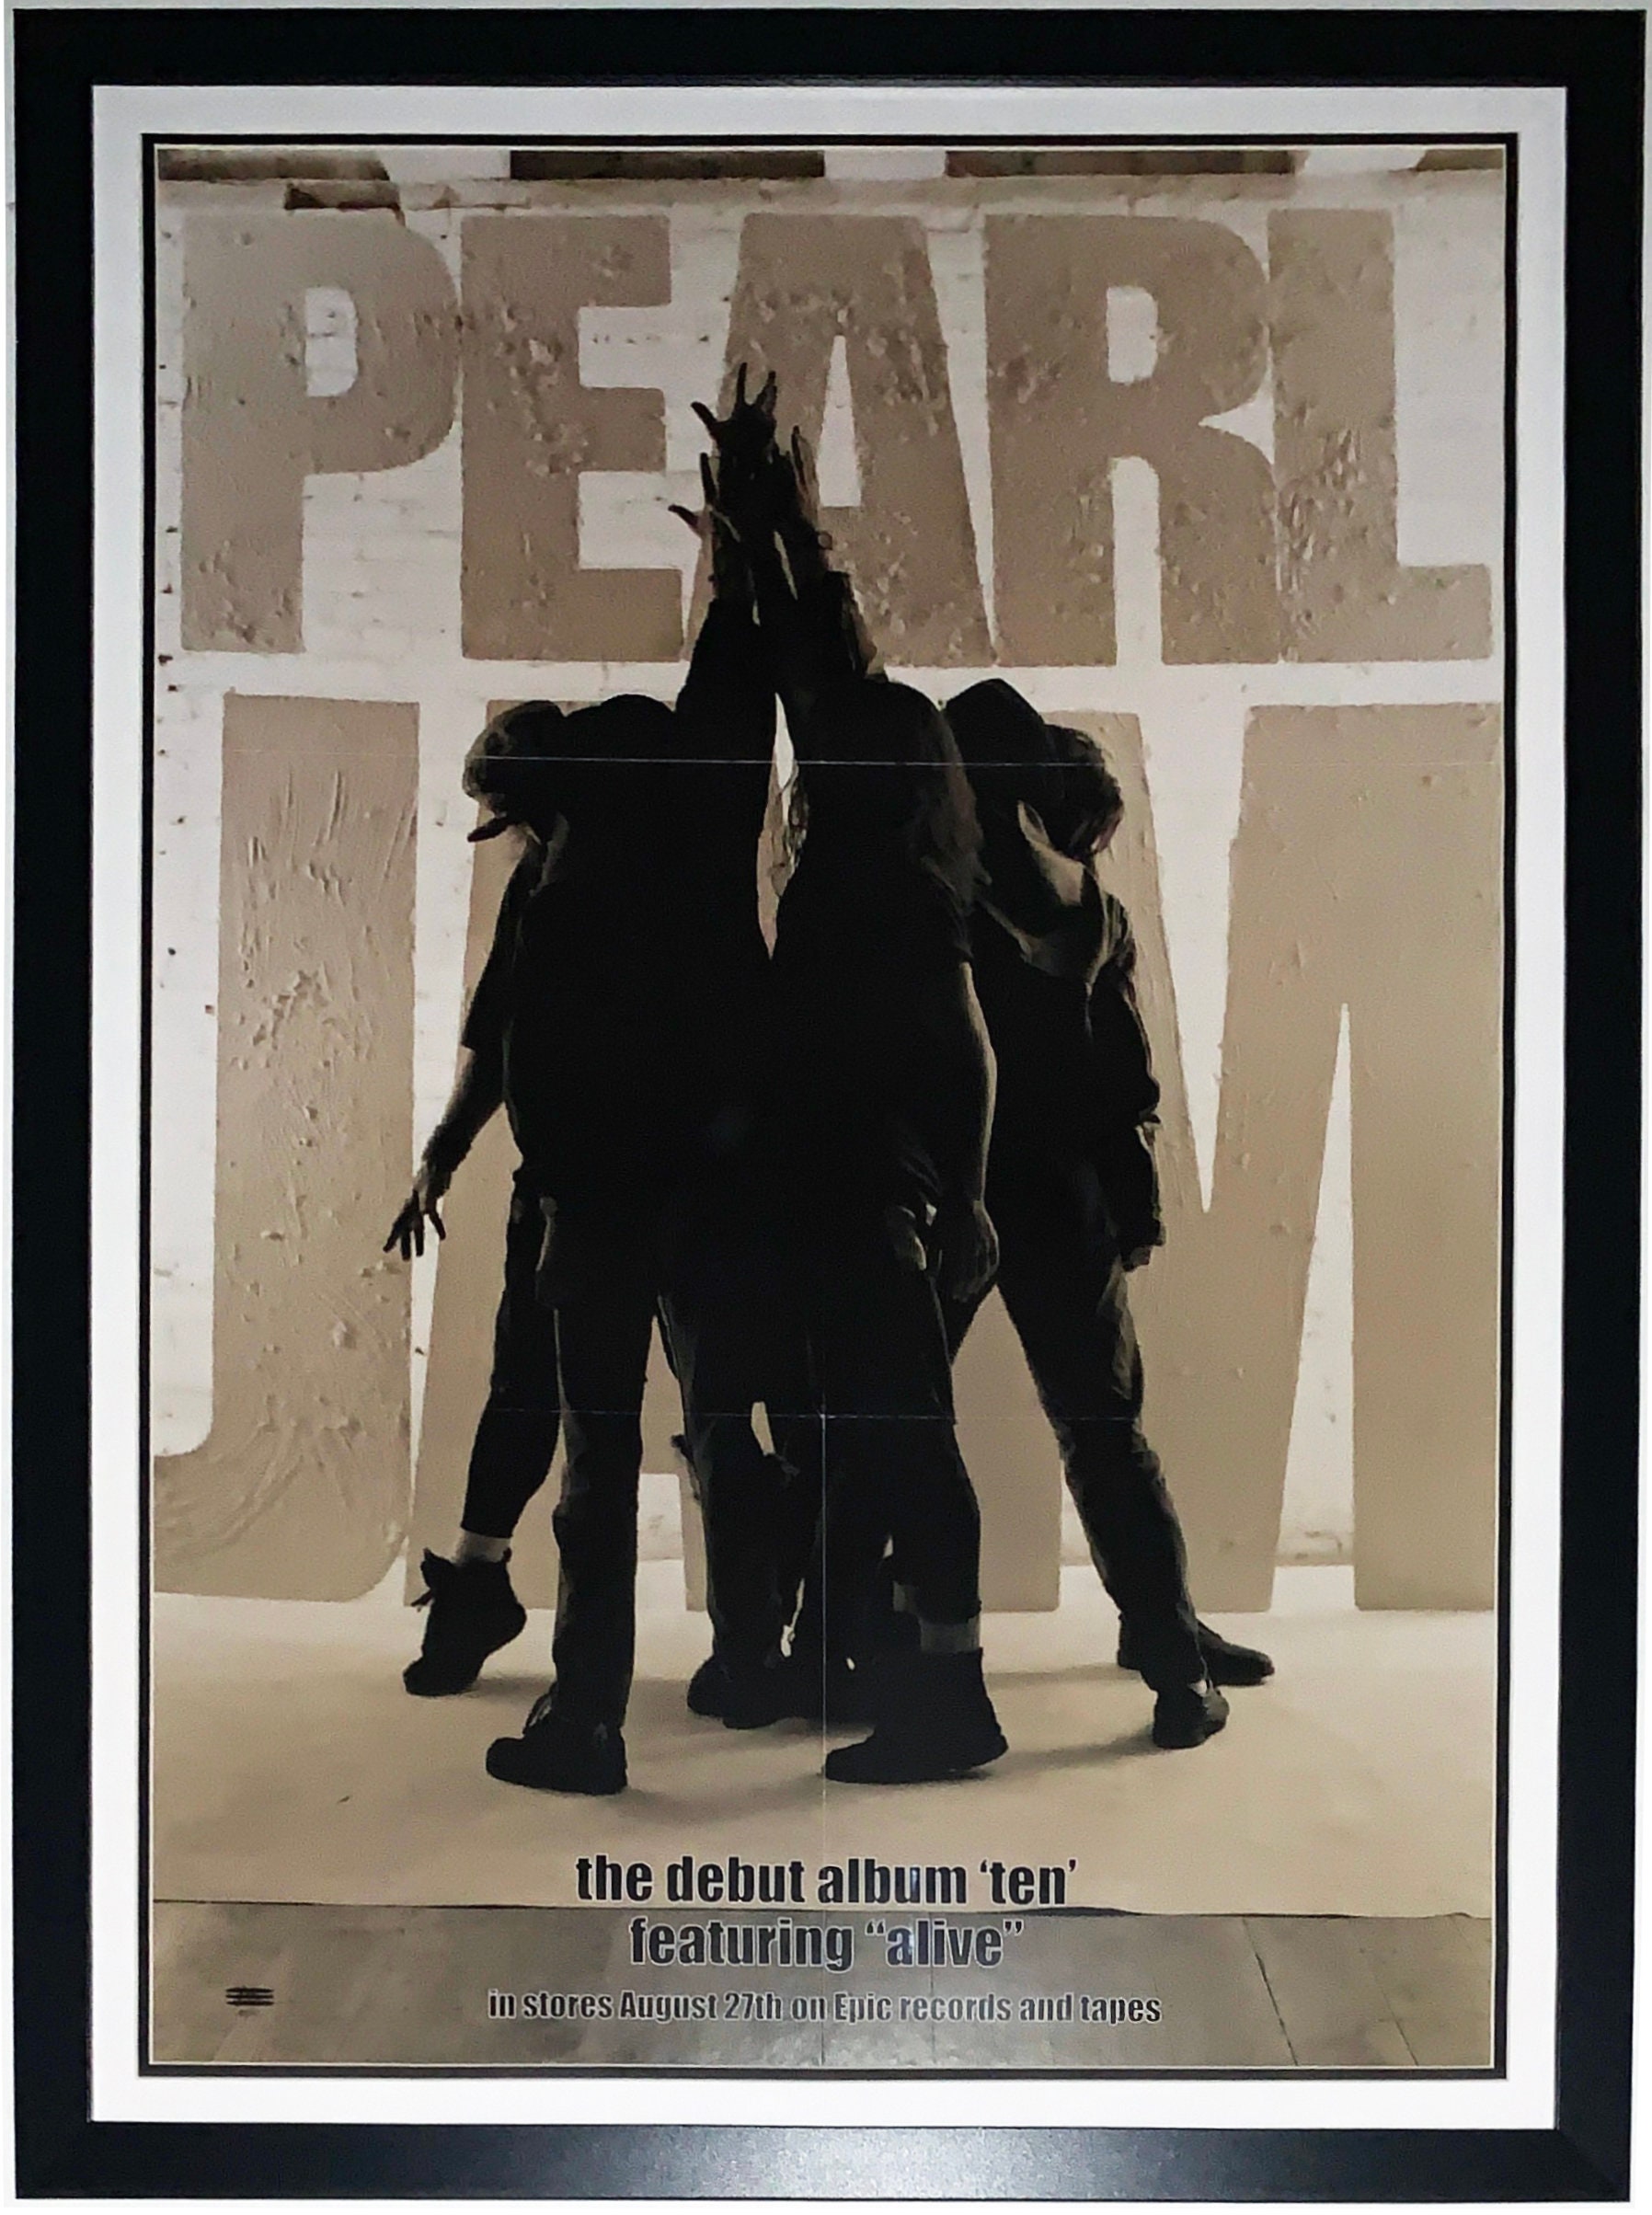 Pearl Jam Poster Collection